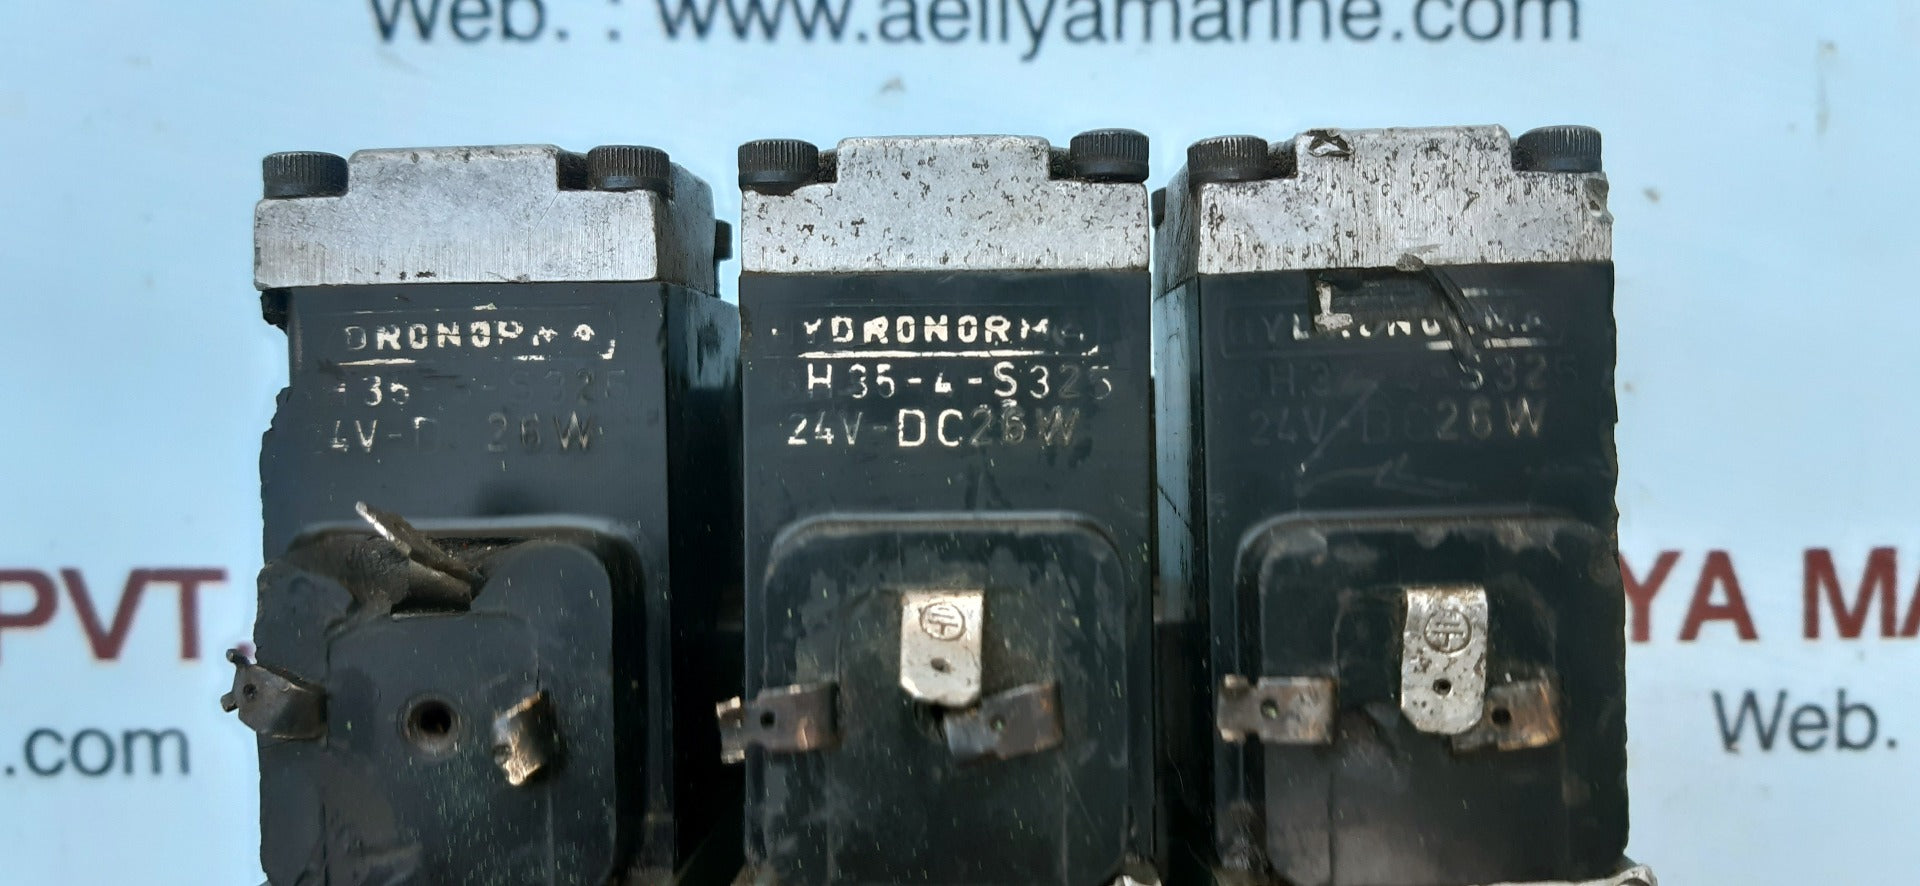 Hydronorma rexroth 2/76 4we 5 n 6.2/g 24 z4 v valve